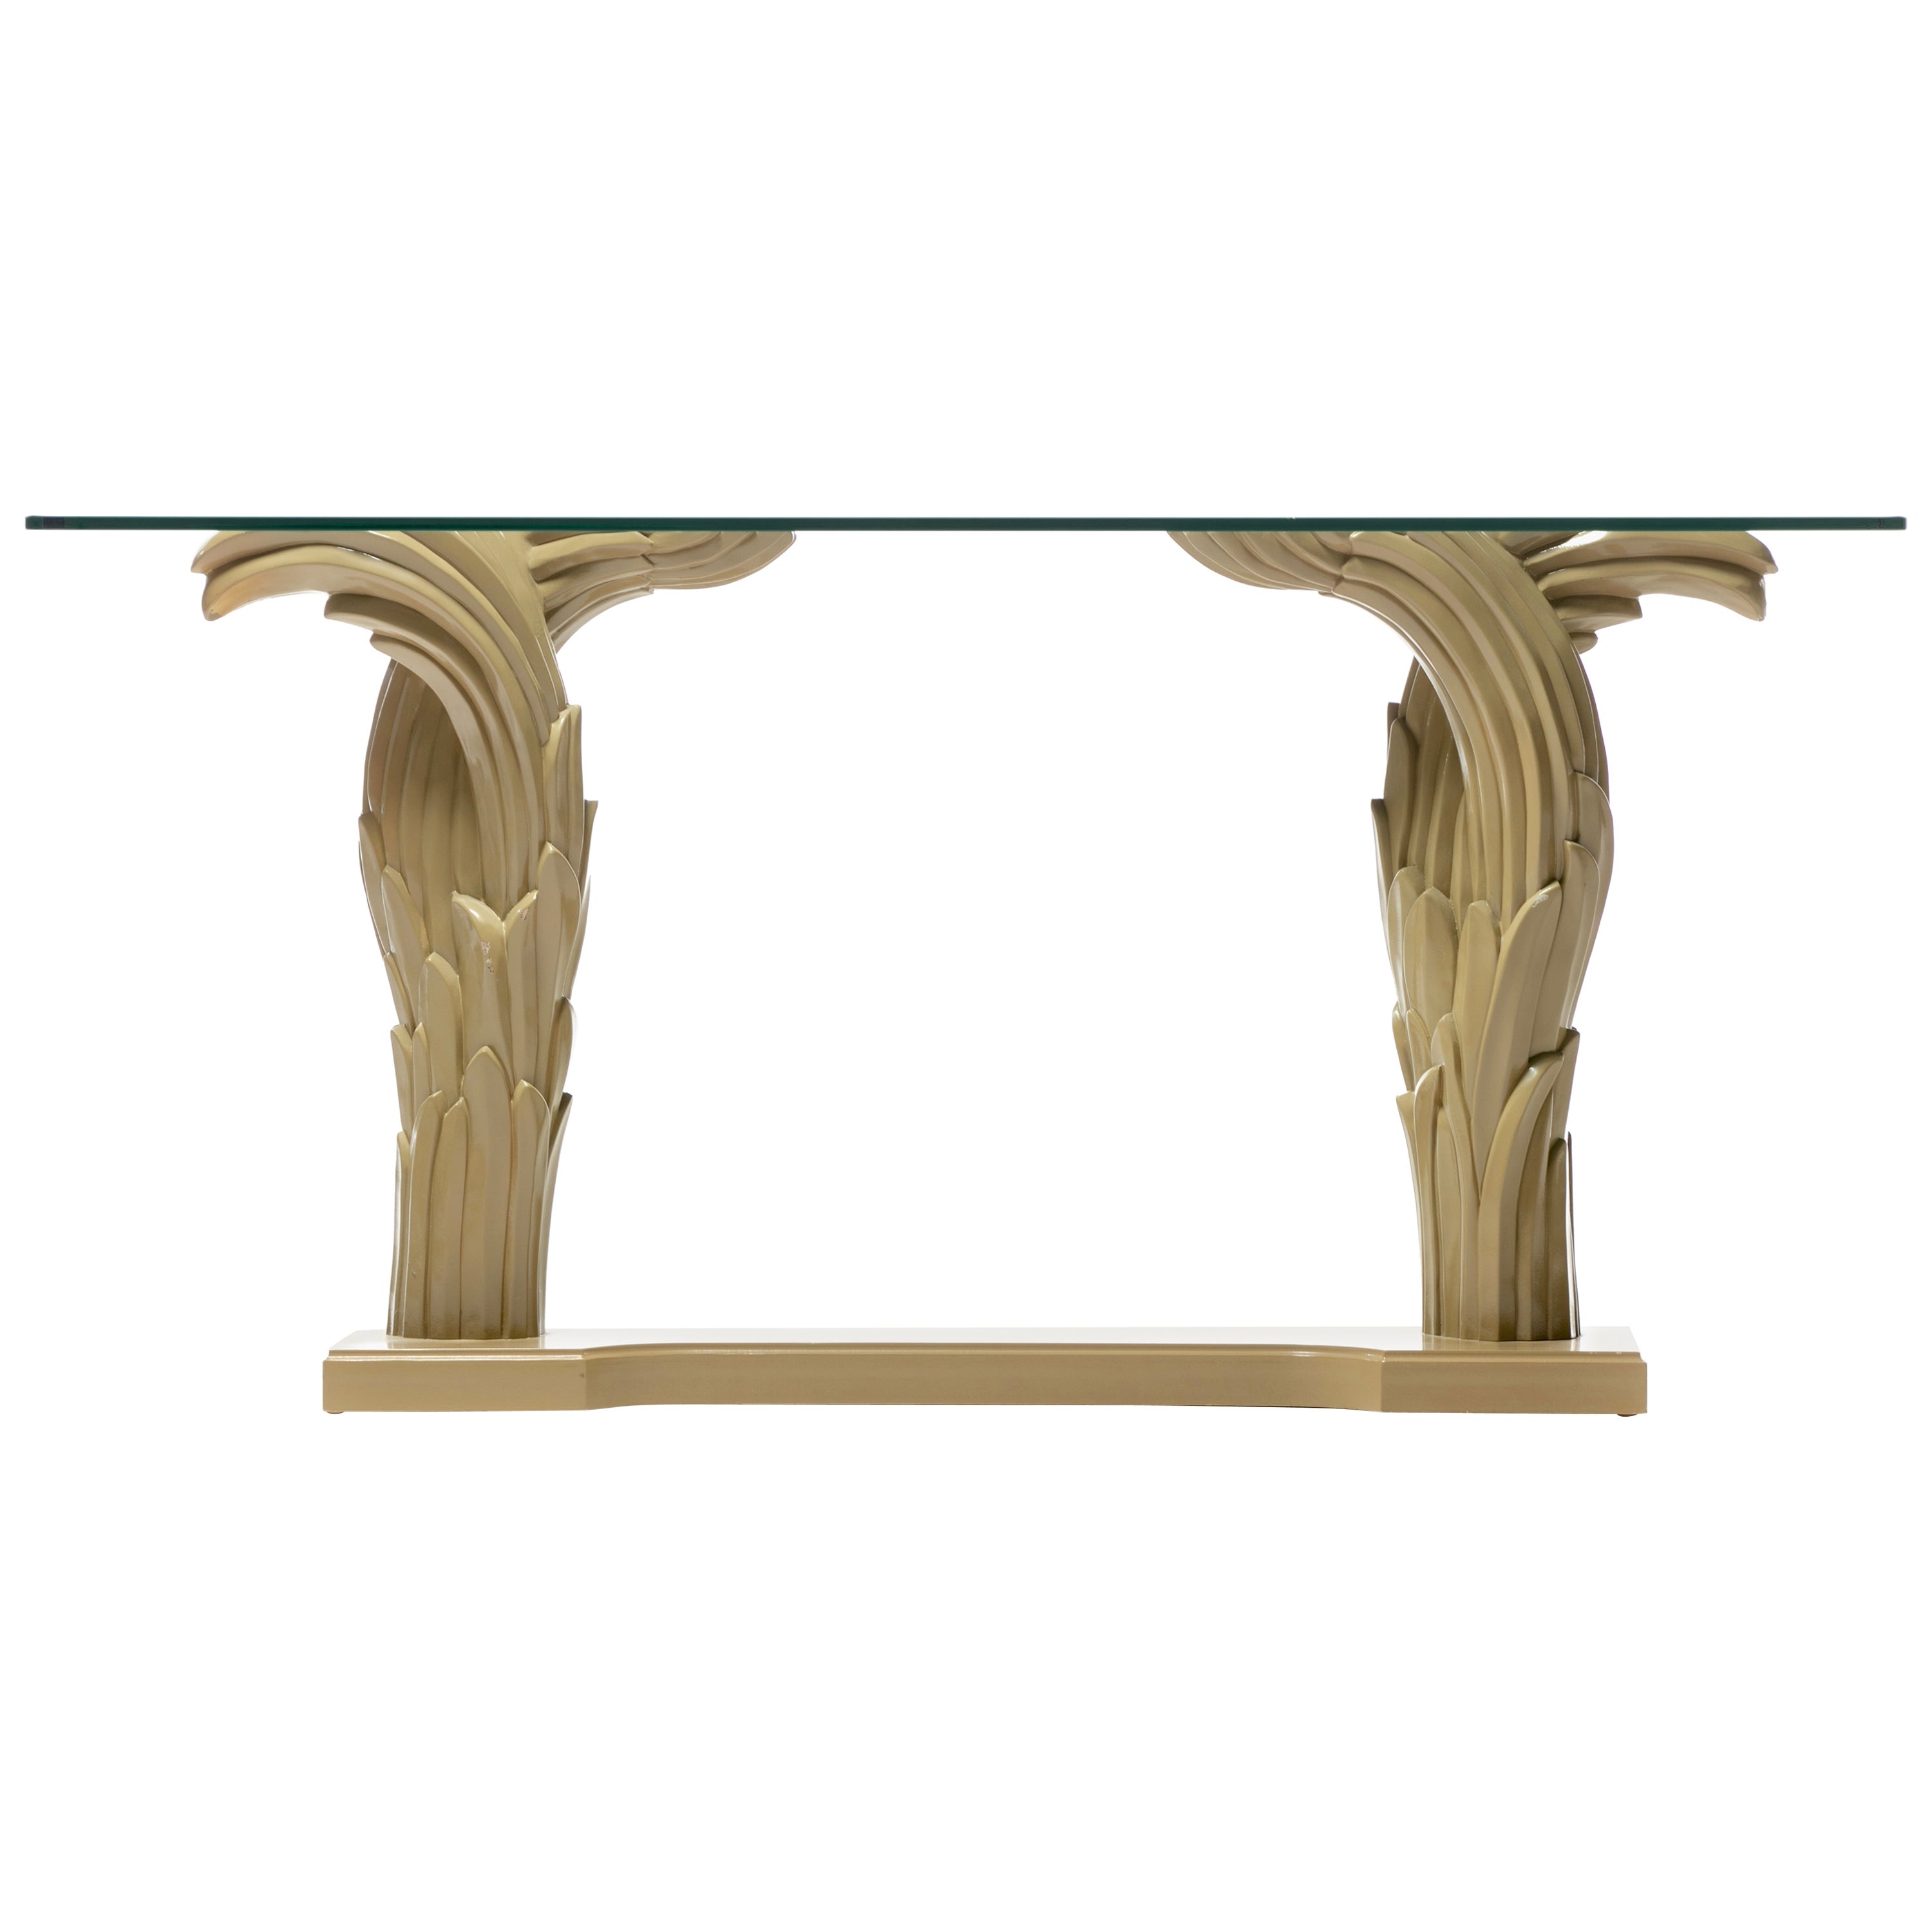 Art Deco Serge Roche Style Palm Leaf Console Lacquered in Almond Latte c. 1980 For Sale